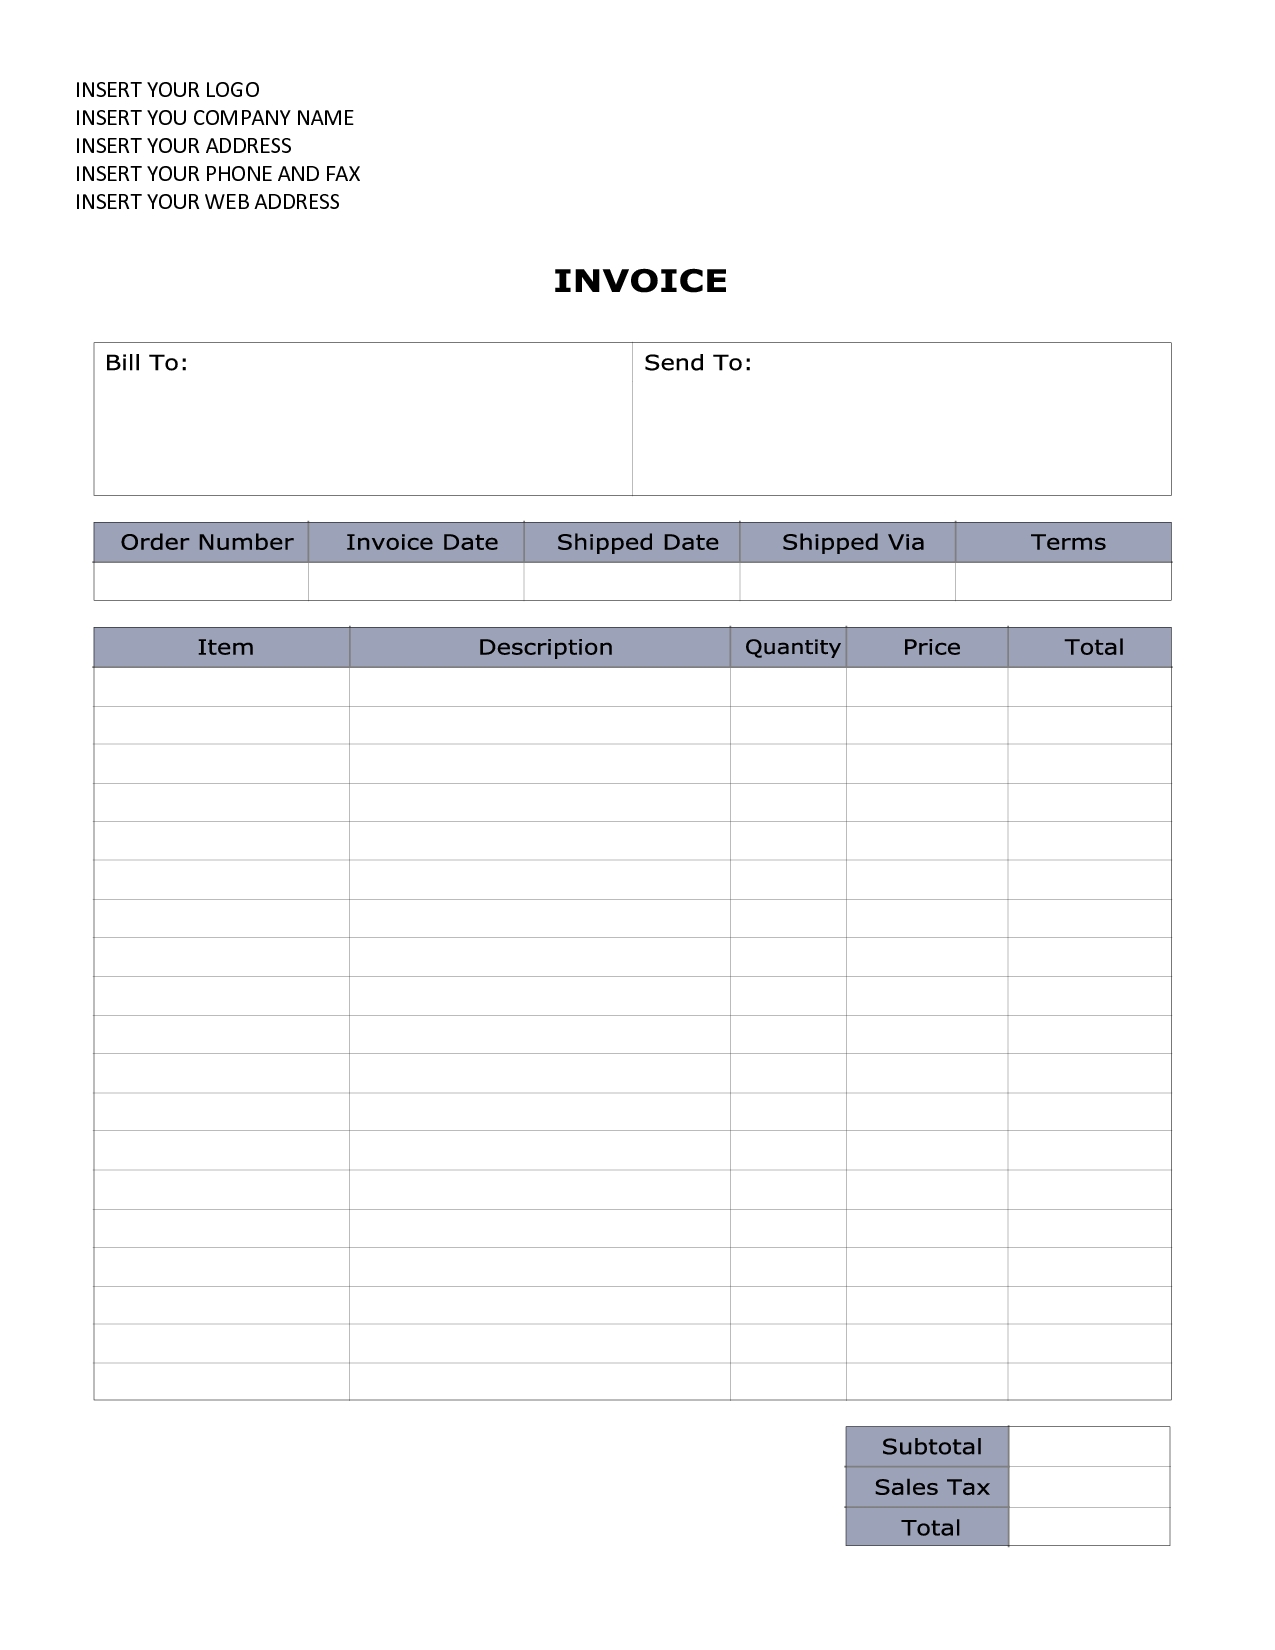 word document invoice template sales invoice sample word olbghygl 1275 X 1650